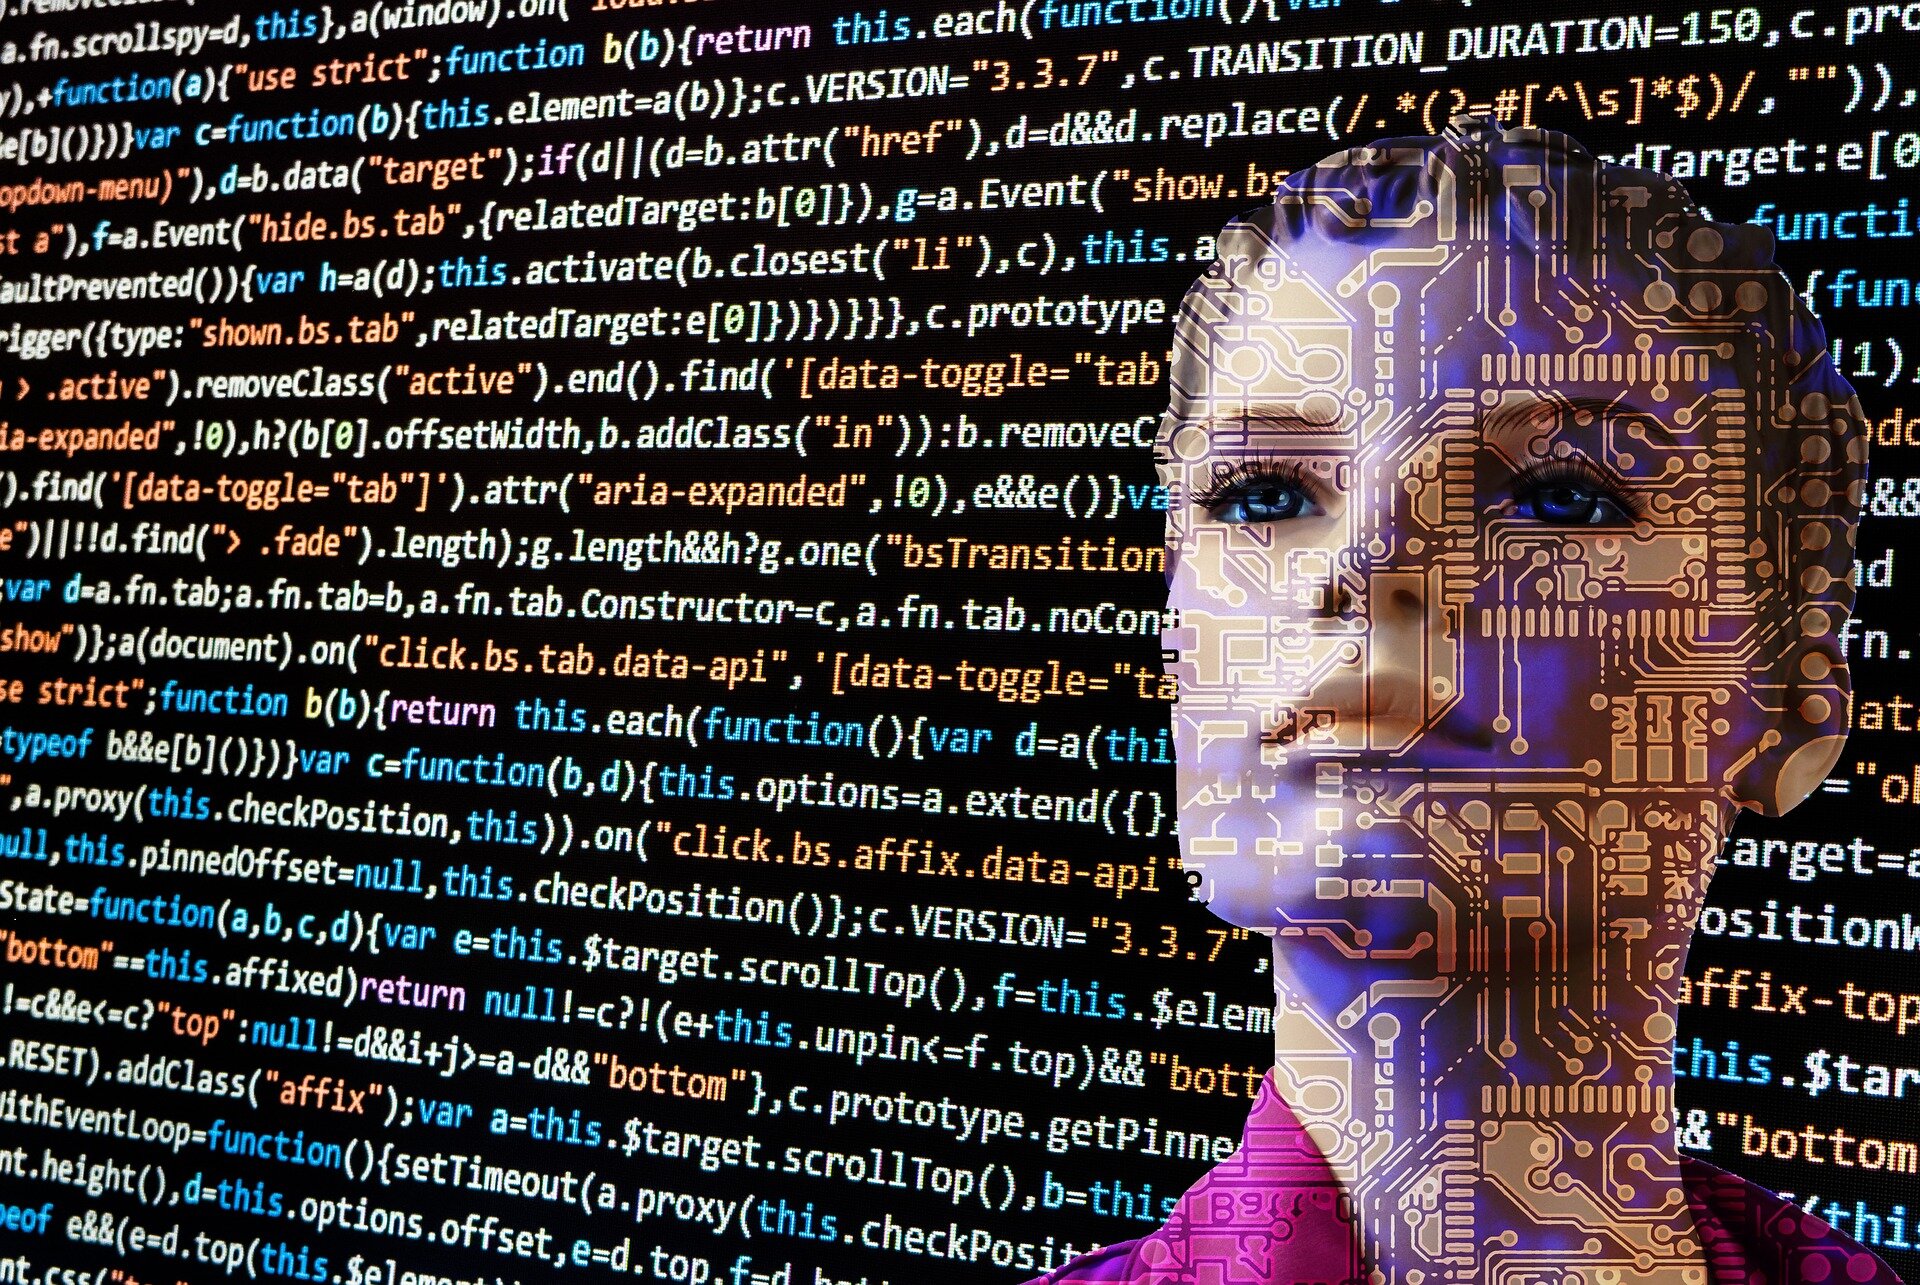 Forget chatbots, this is how corporate America is really using AI